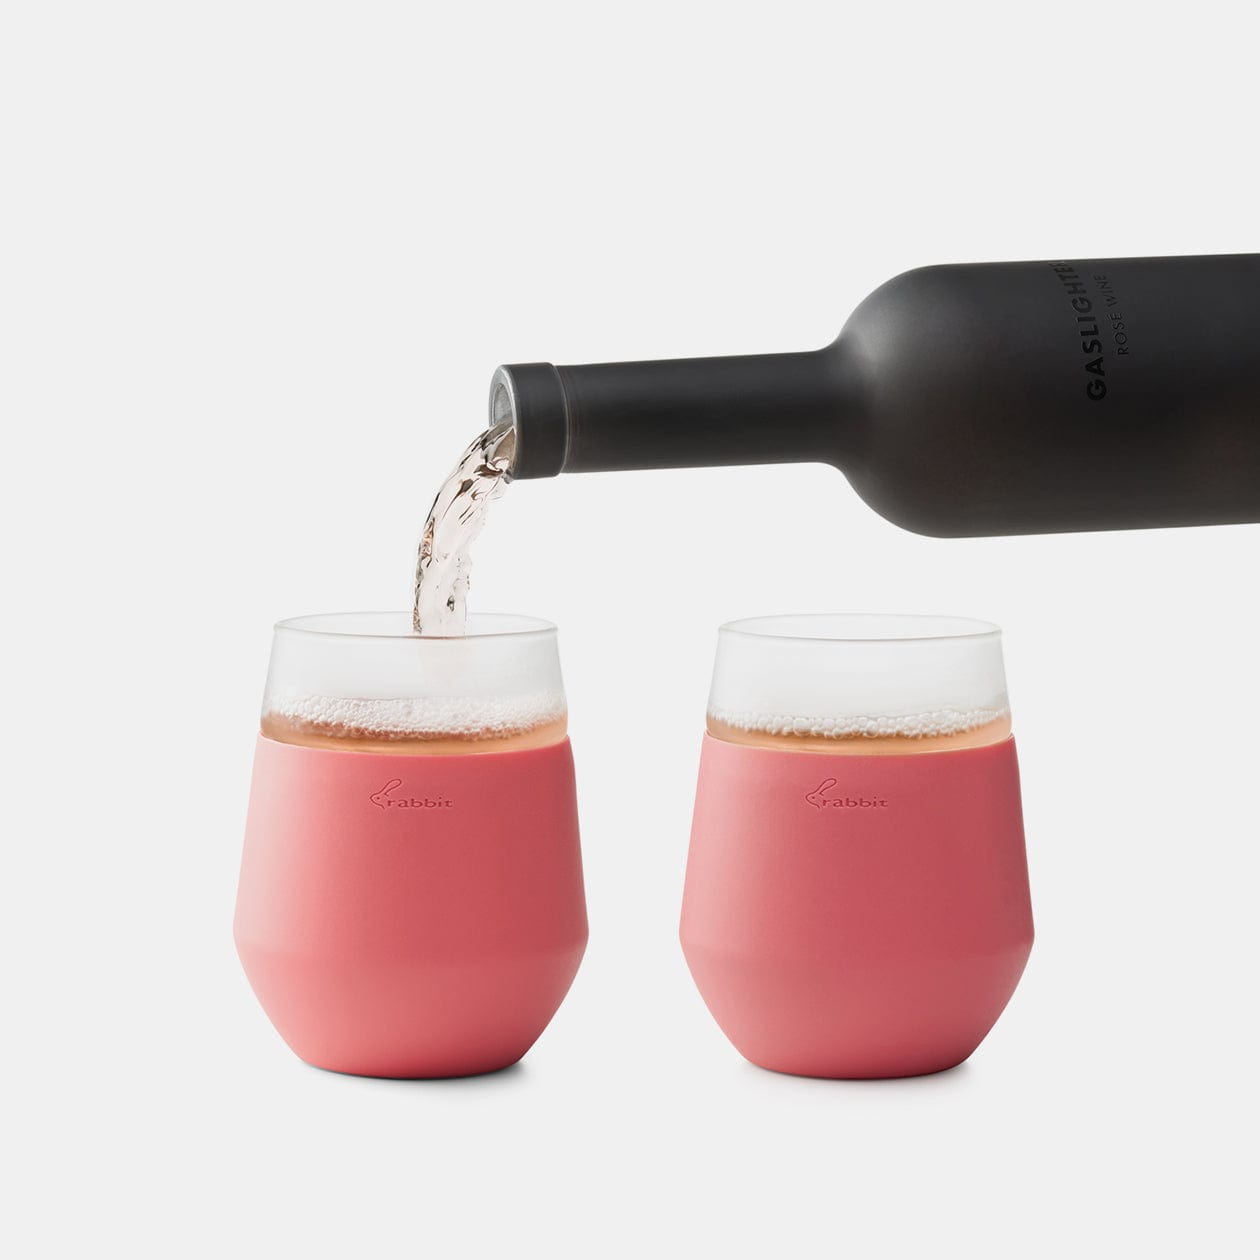 Hands Down, The Best Insulated Wine Tumbler You Can Buy